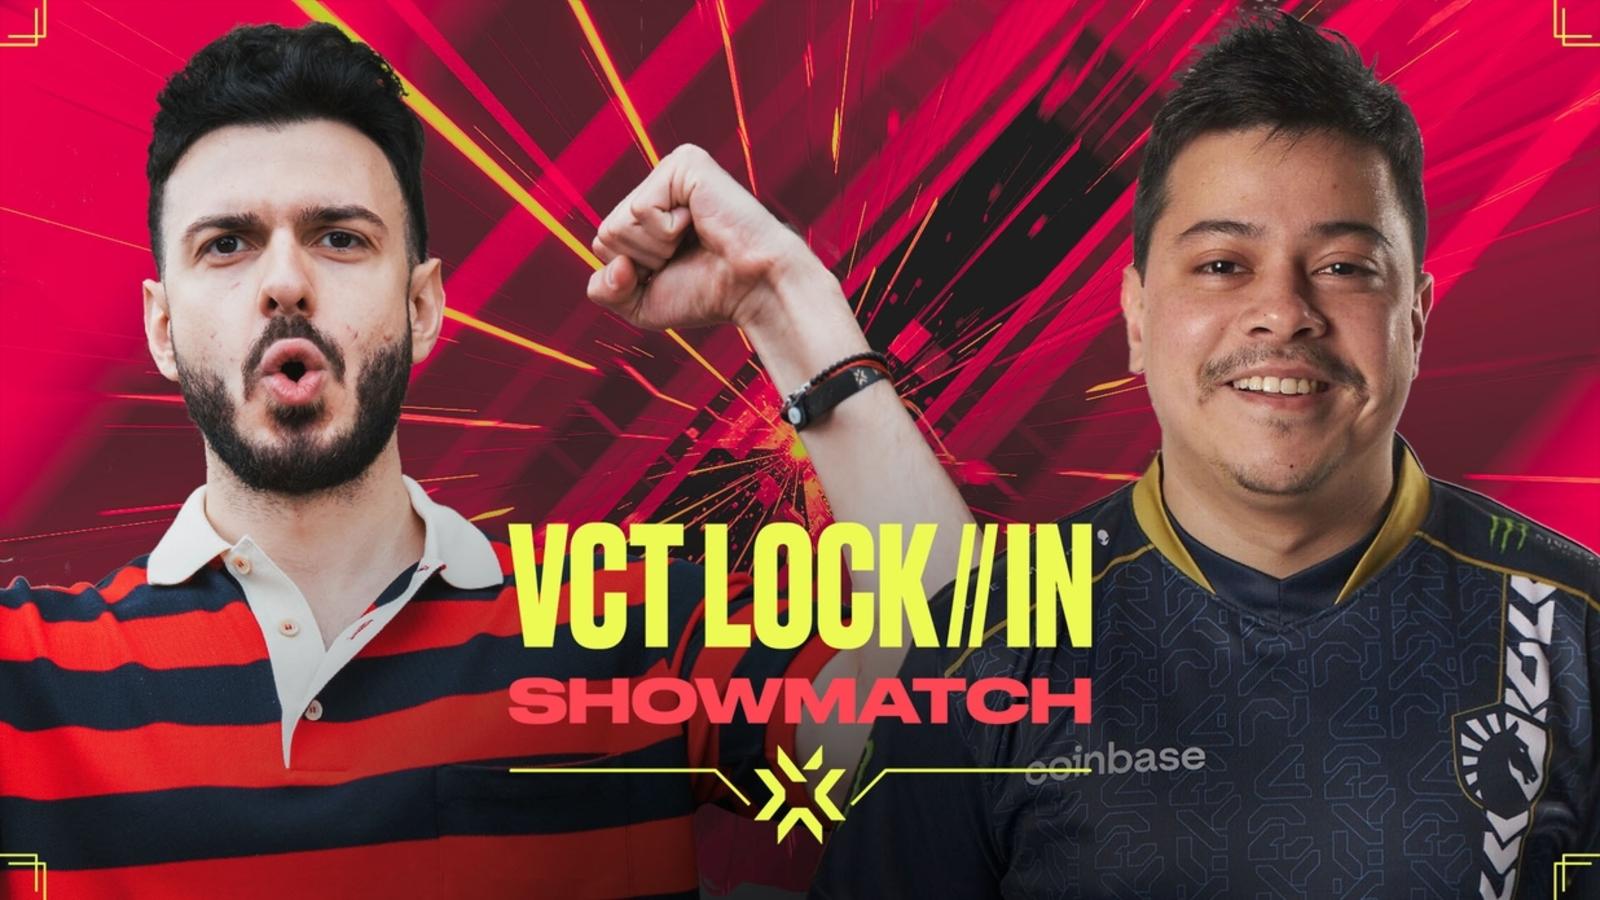 VCT LOCK//IN Showmatch